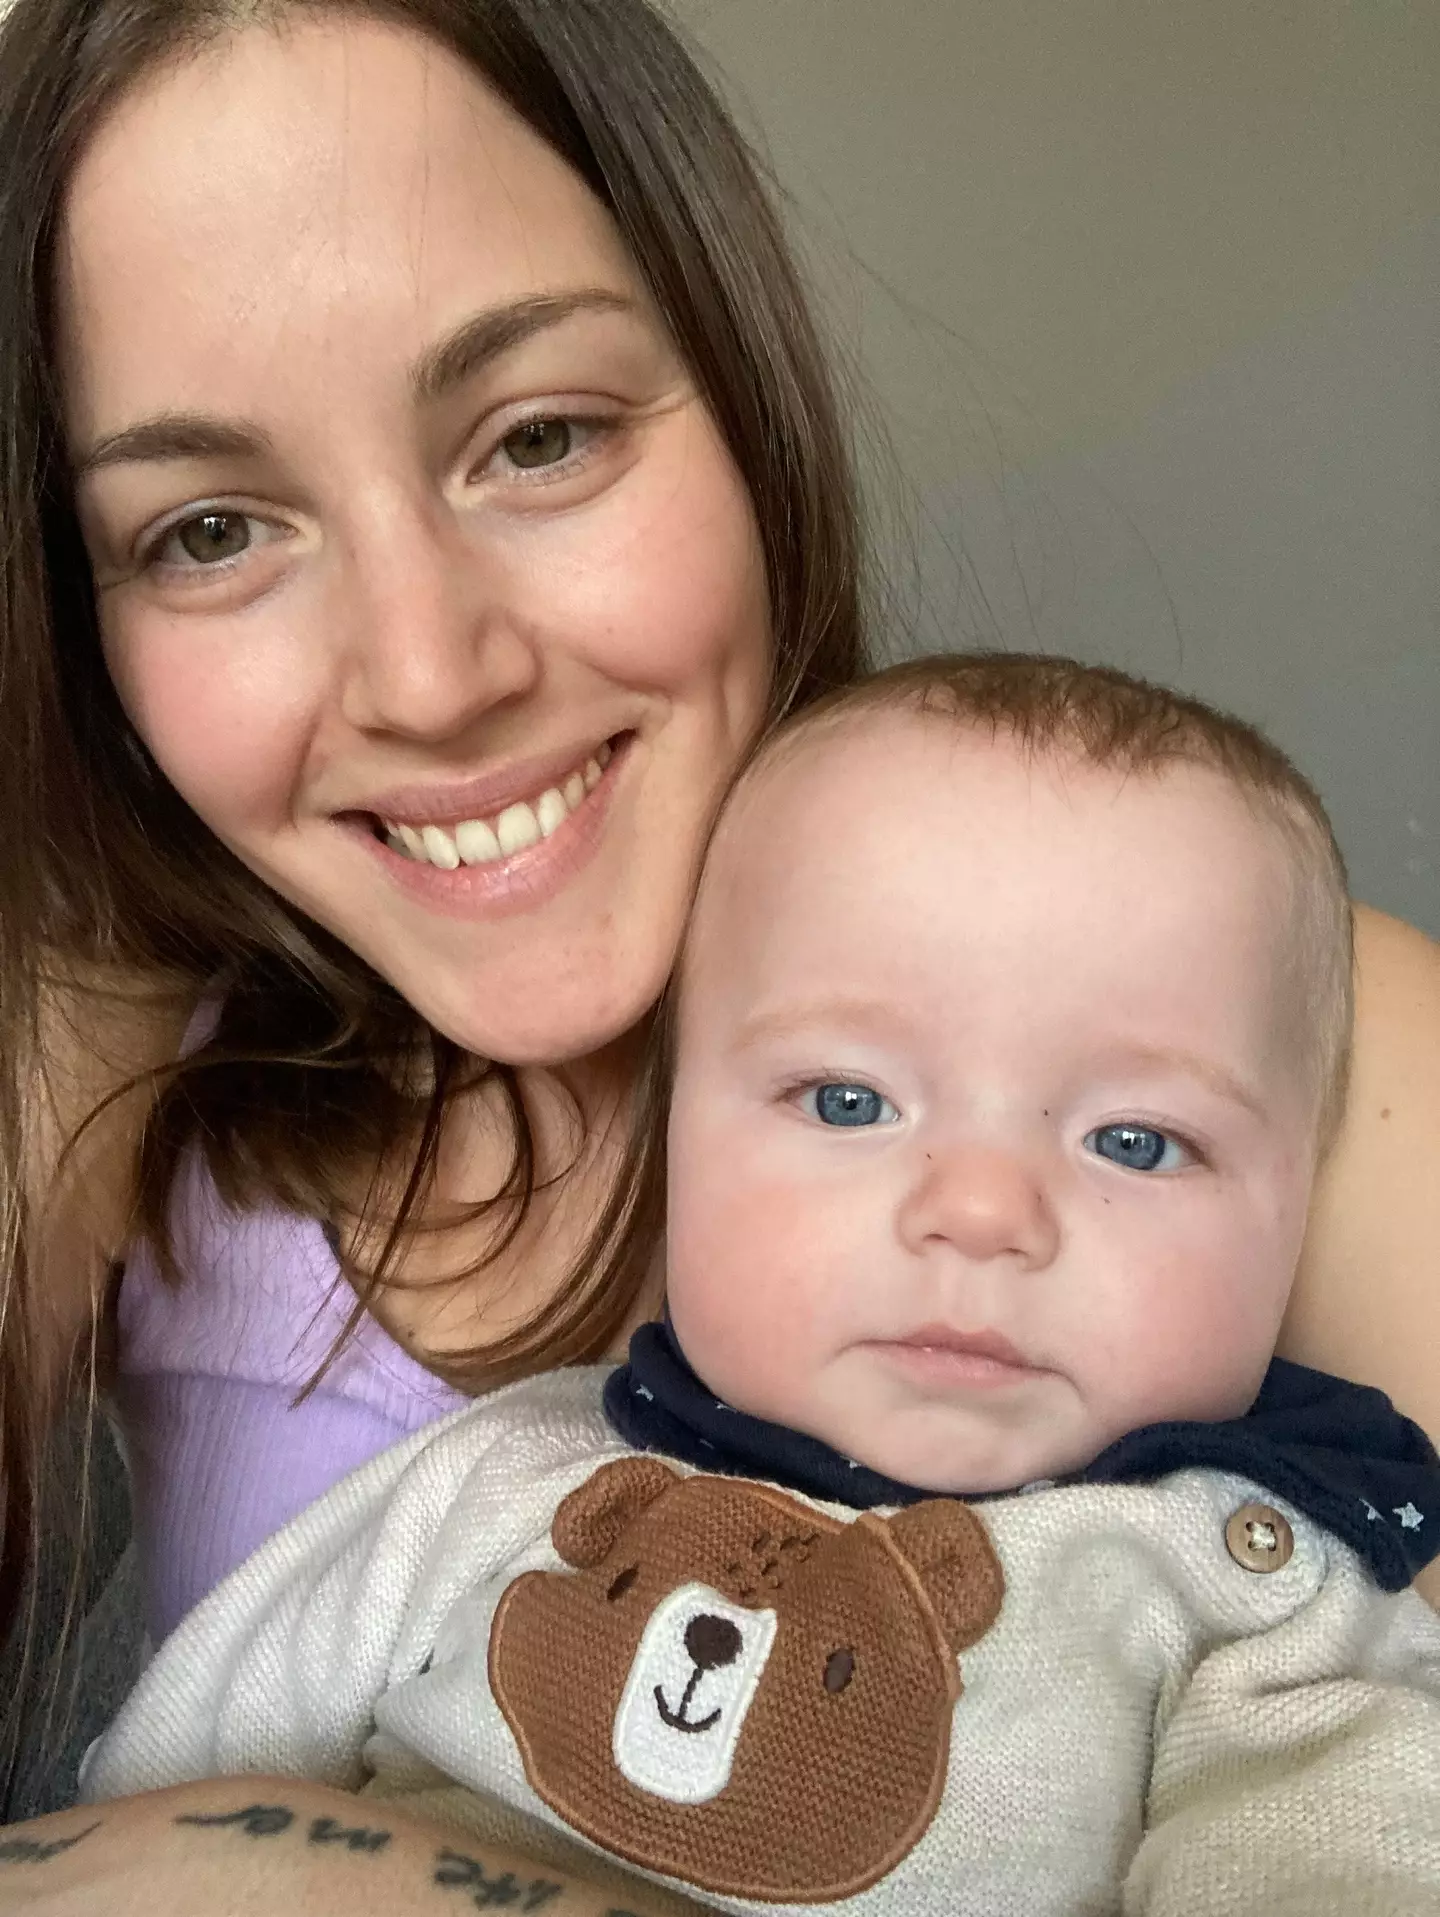 New mum Mareike said they 'couldn't be happier'.